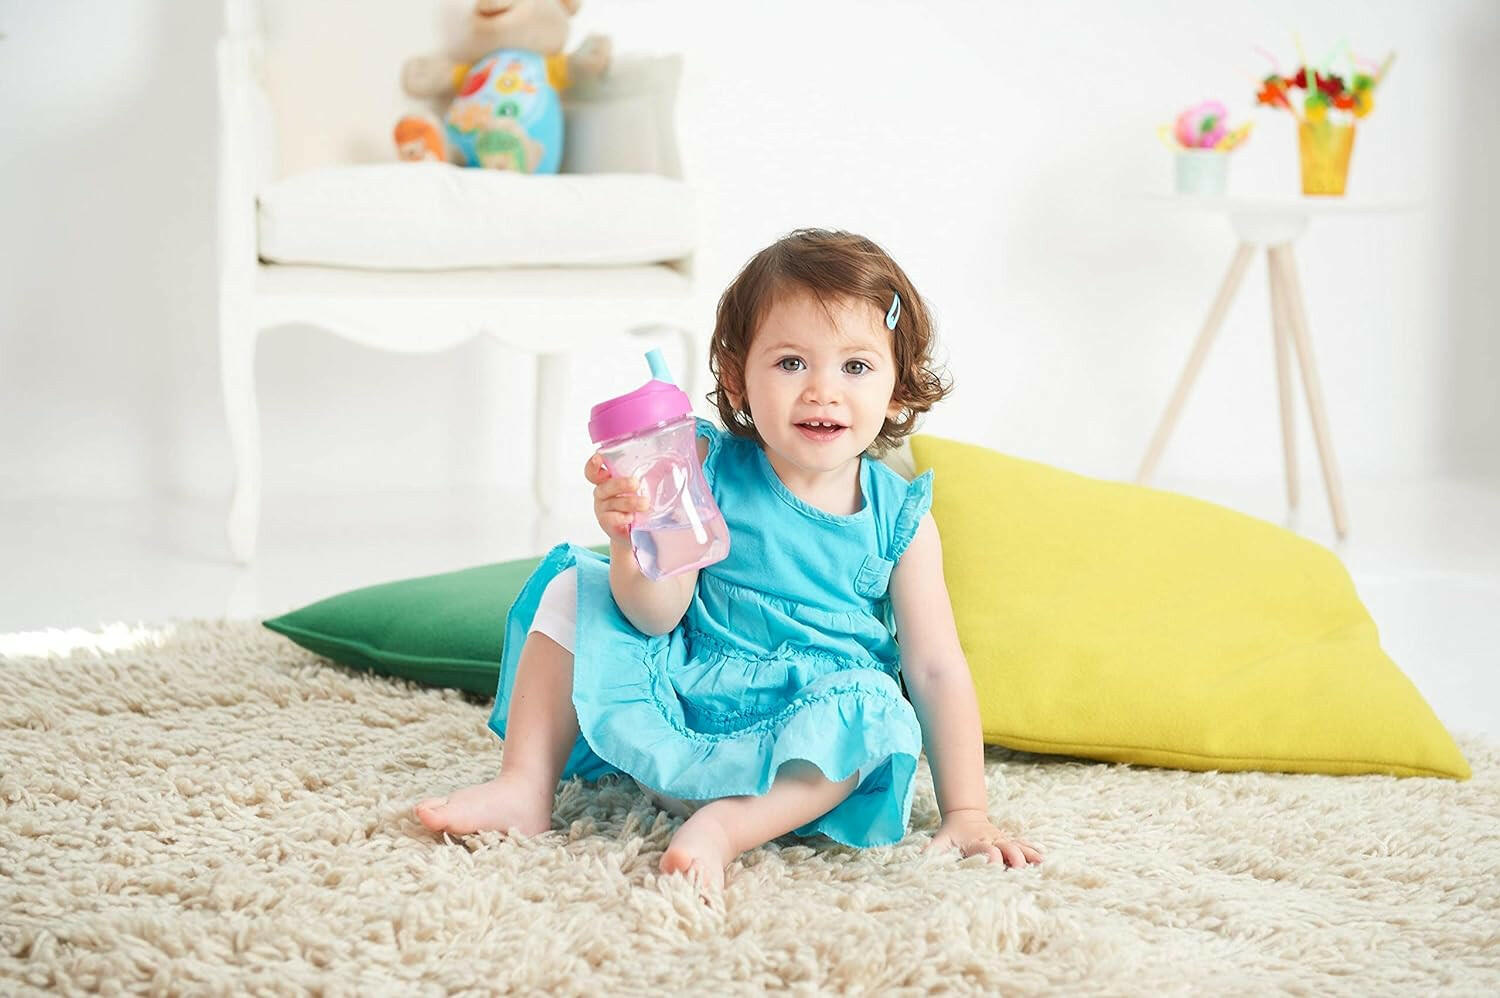 Chicco Advanced Cup 266 ml Baby Bottle Cup 12+ Months for Learning to Drink, Drinking Glass with Straw, Ergonomic Spout and Easy Sips Valve, BPA.